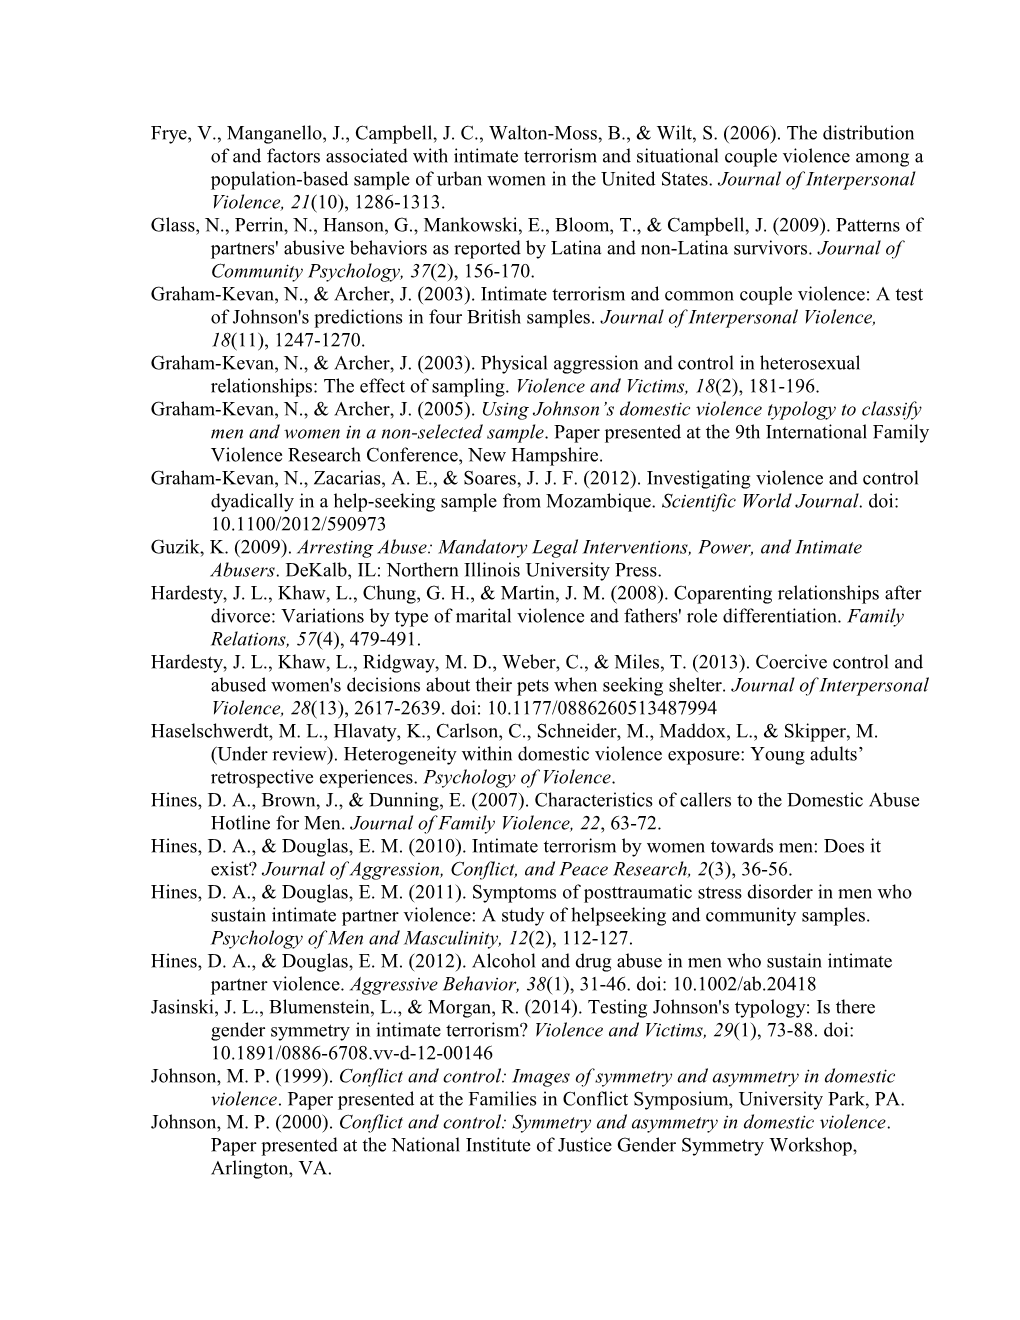 Bibliography of Empirical Papers Addressing the Typology